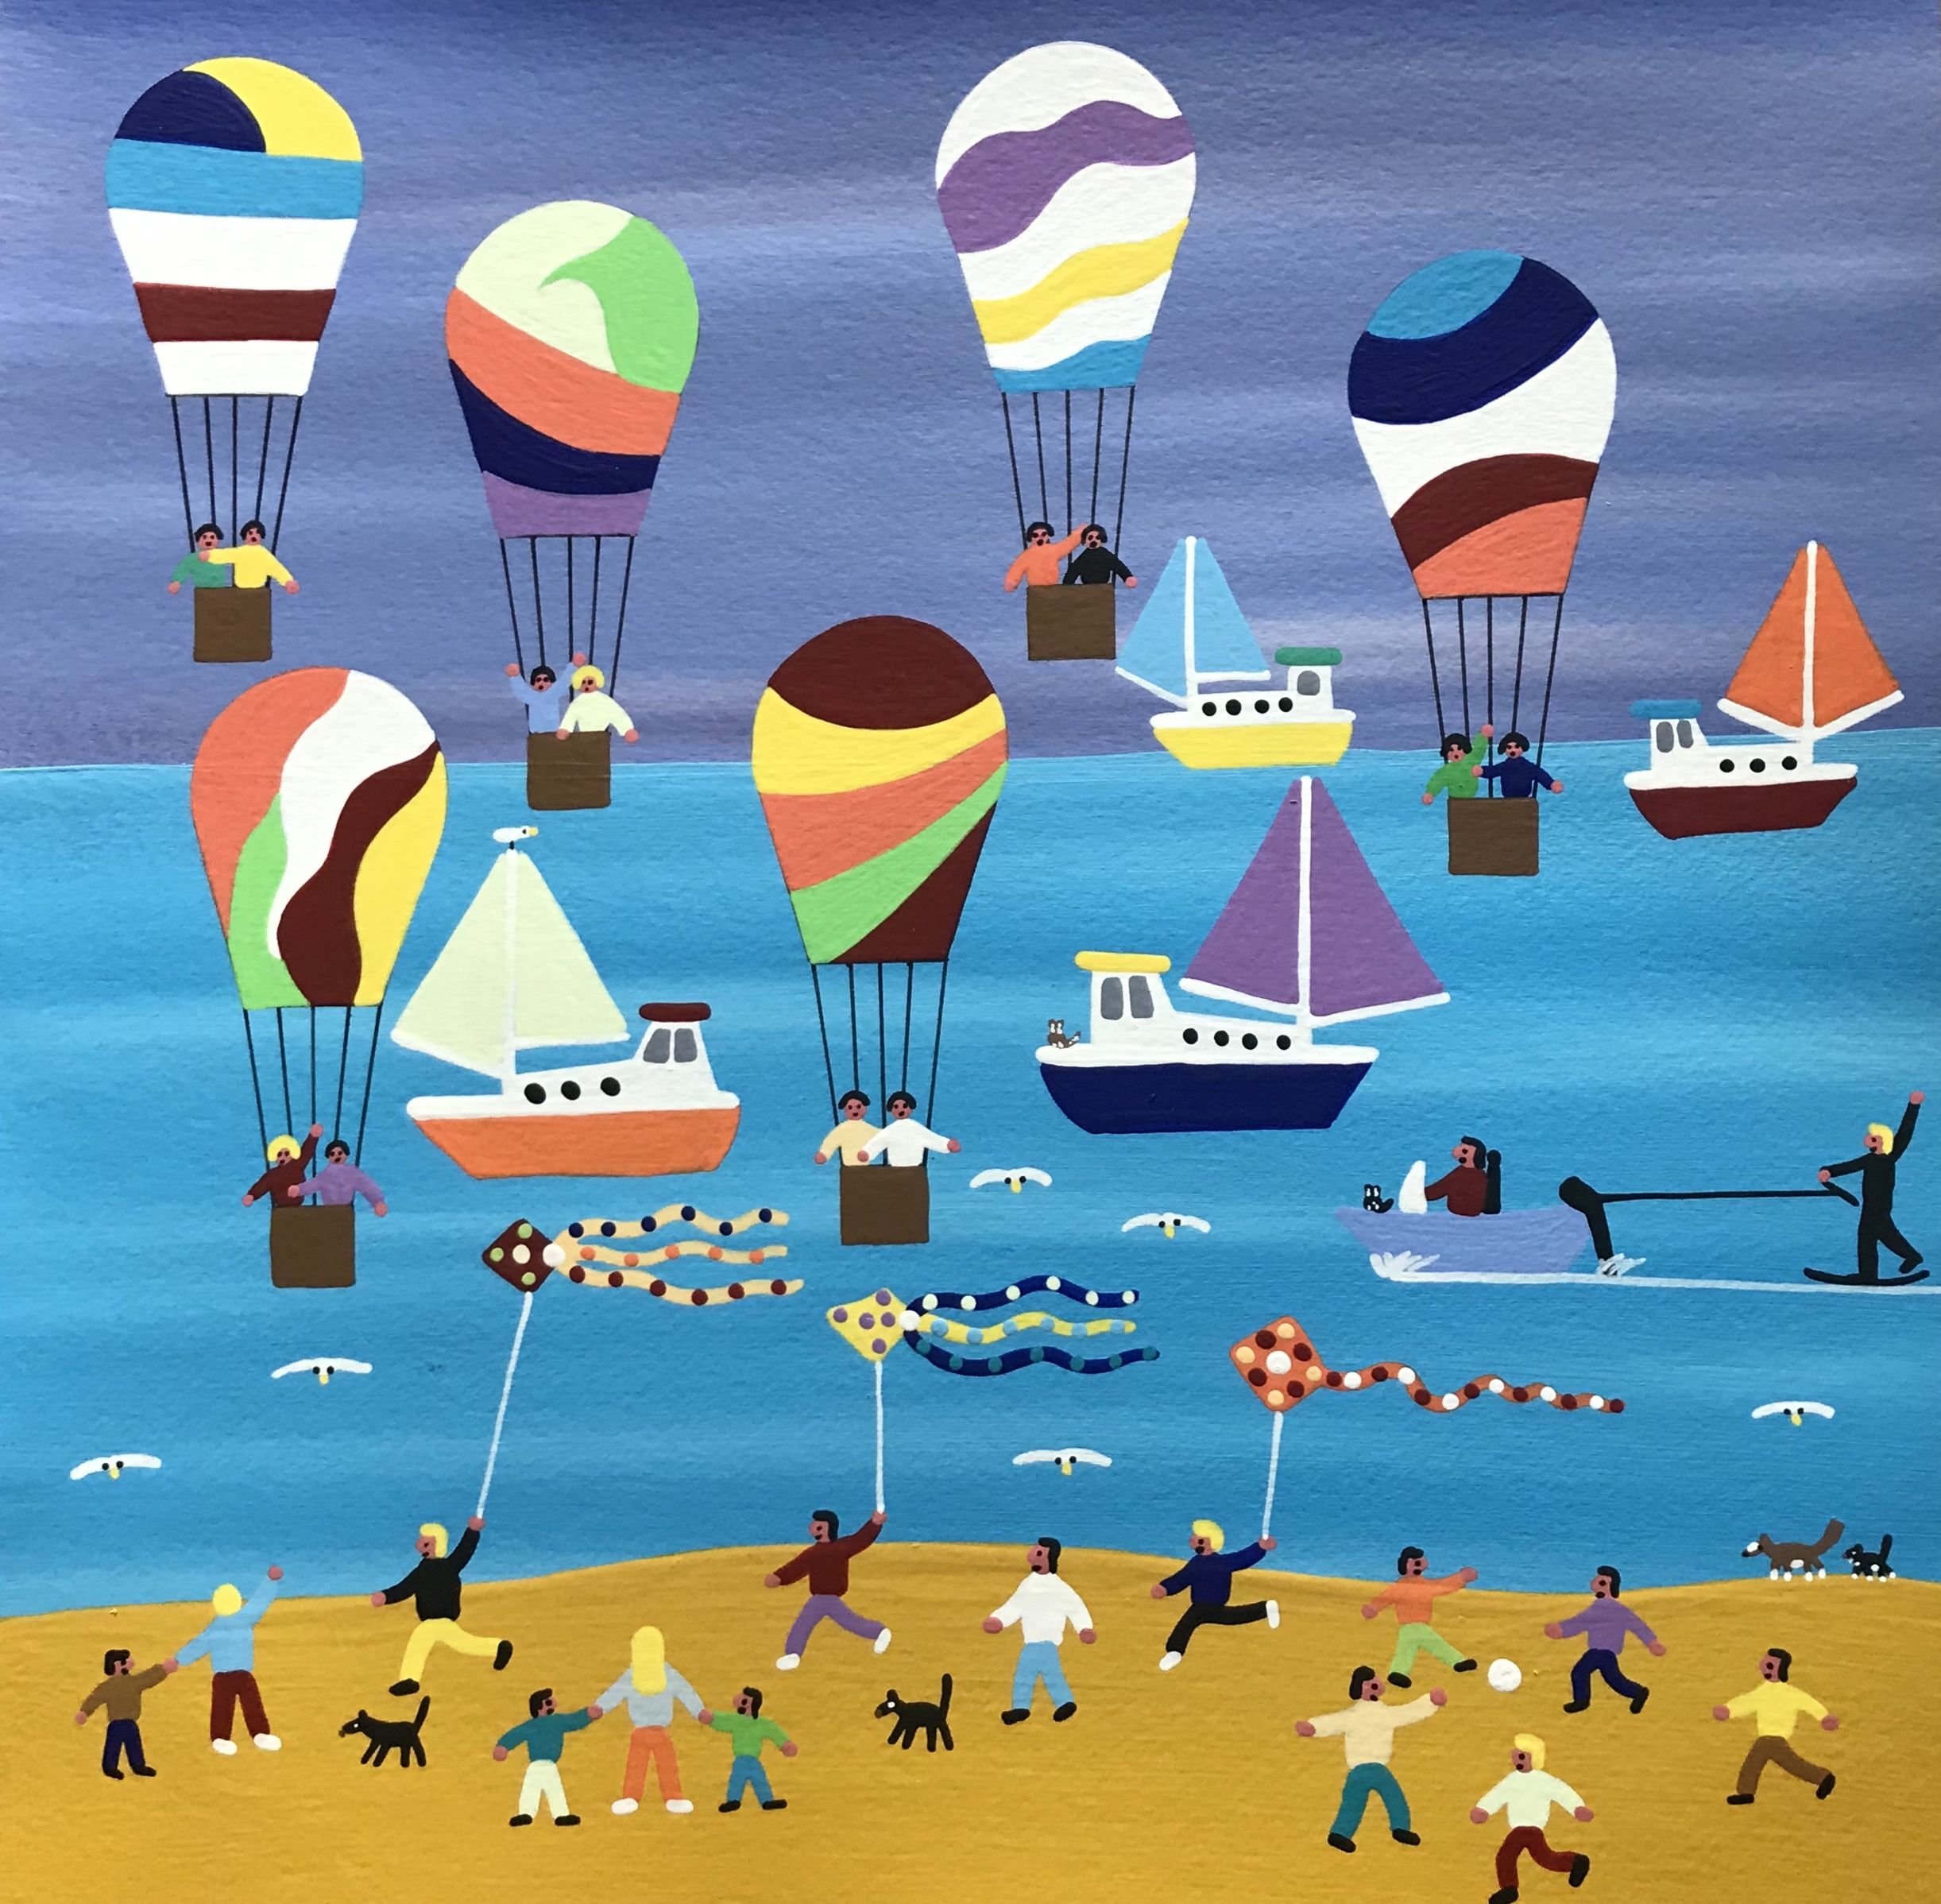 Fabulous day at the seaside by Gordon Barker